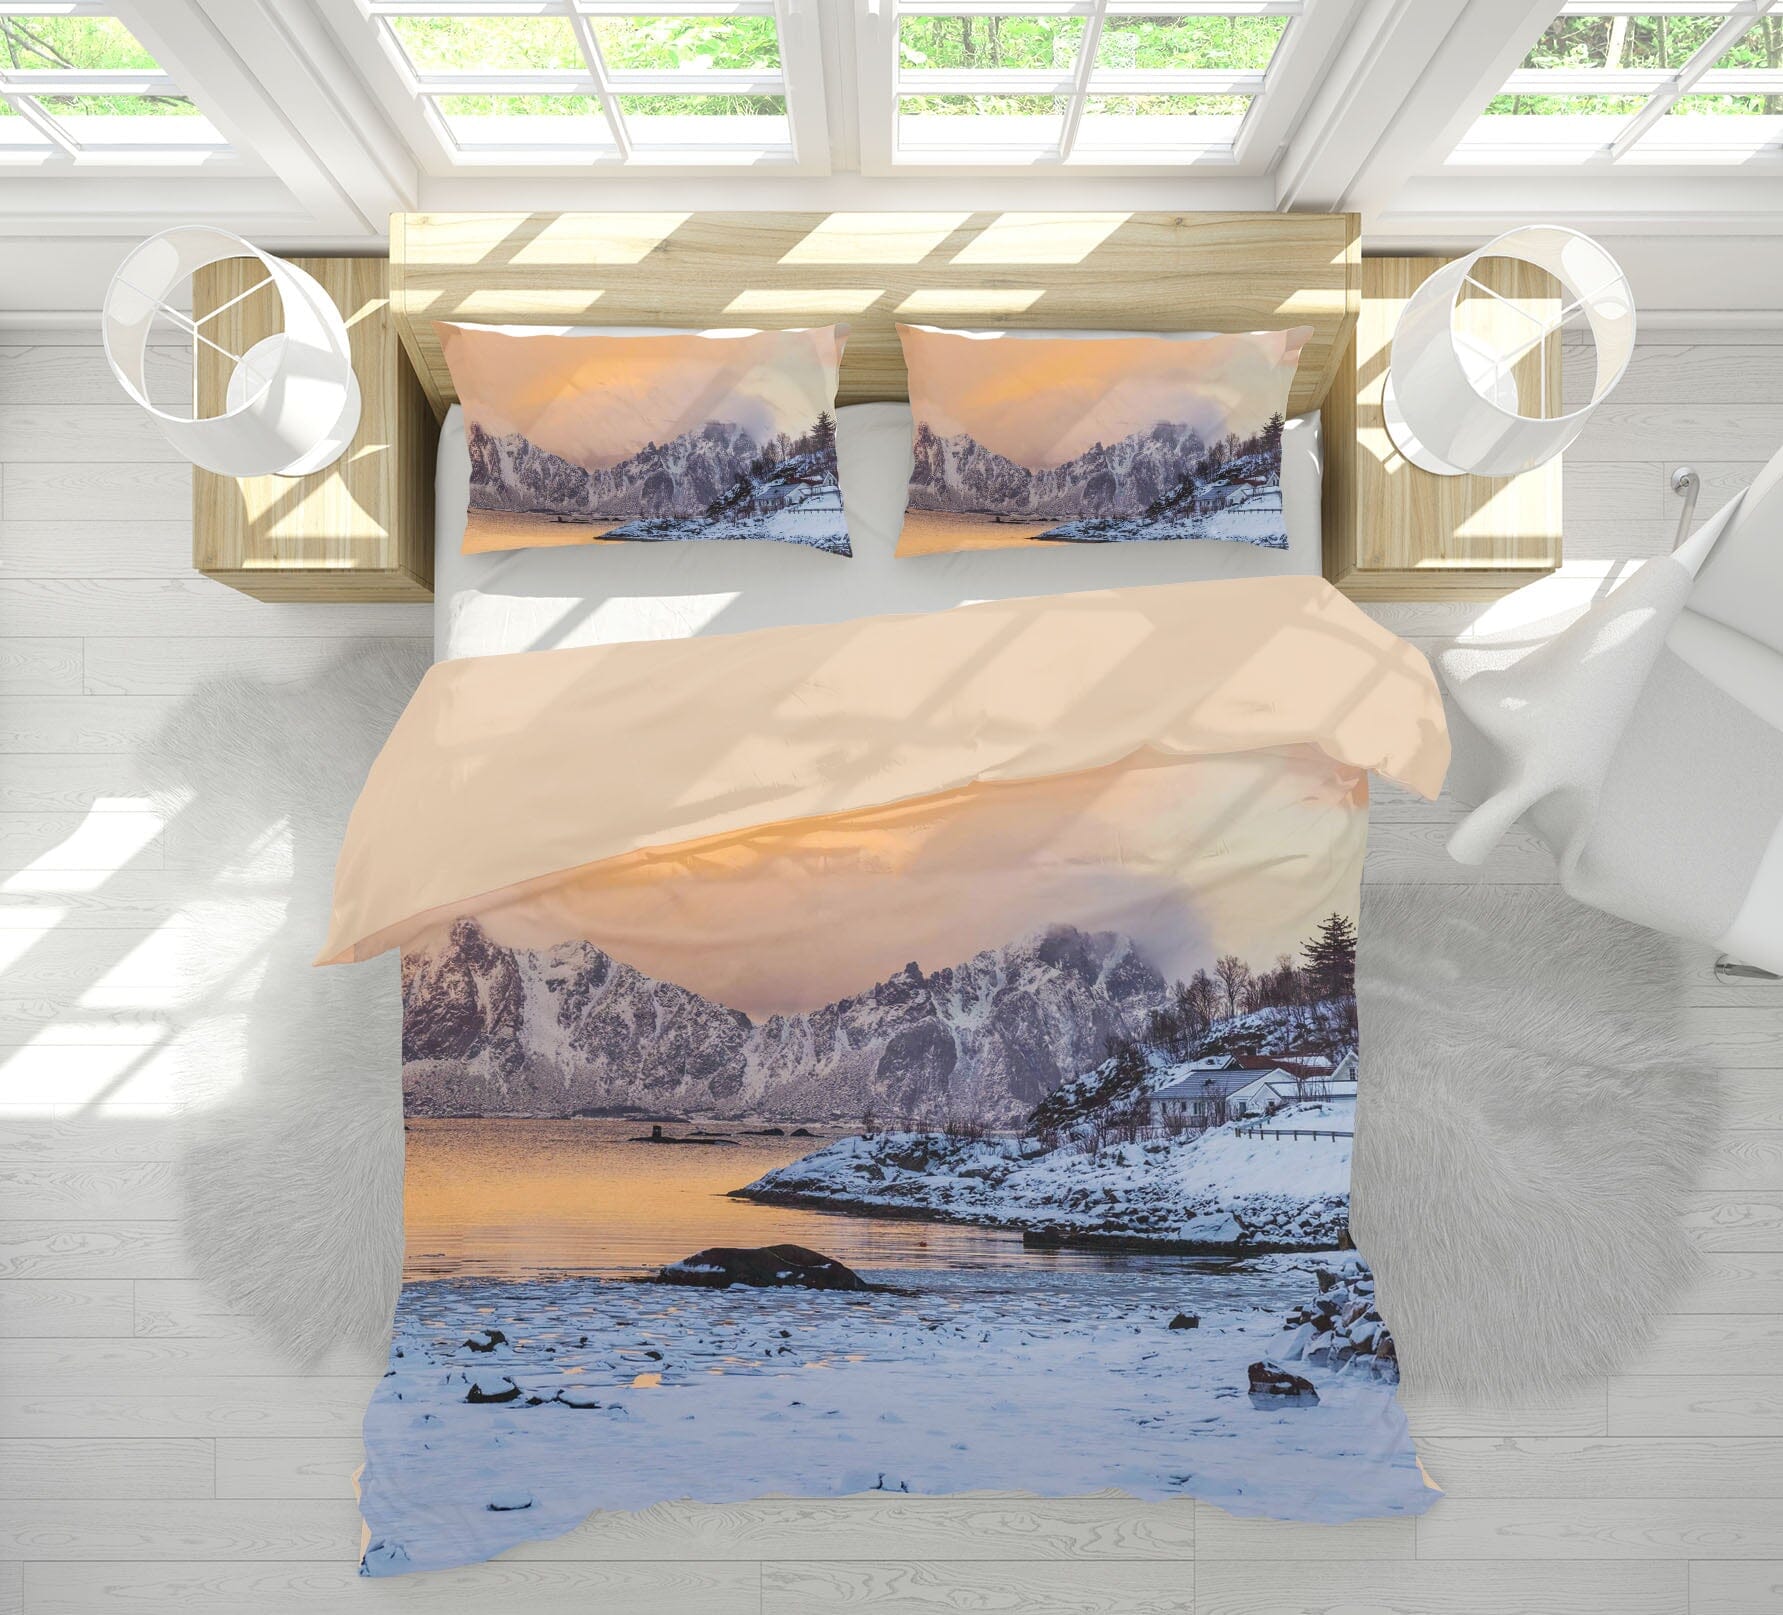 3D White World 2148 Marco Carmassi Bedding Bed Pillowcases Quilt Quiet Covers AJ Creativity Home 